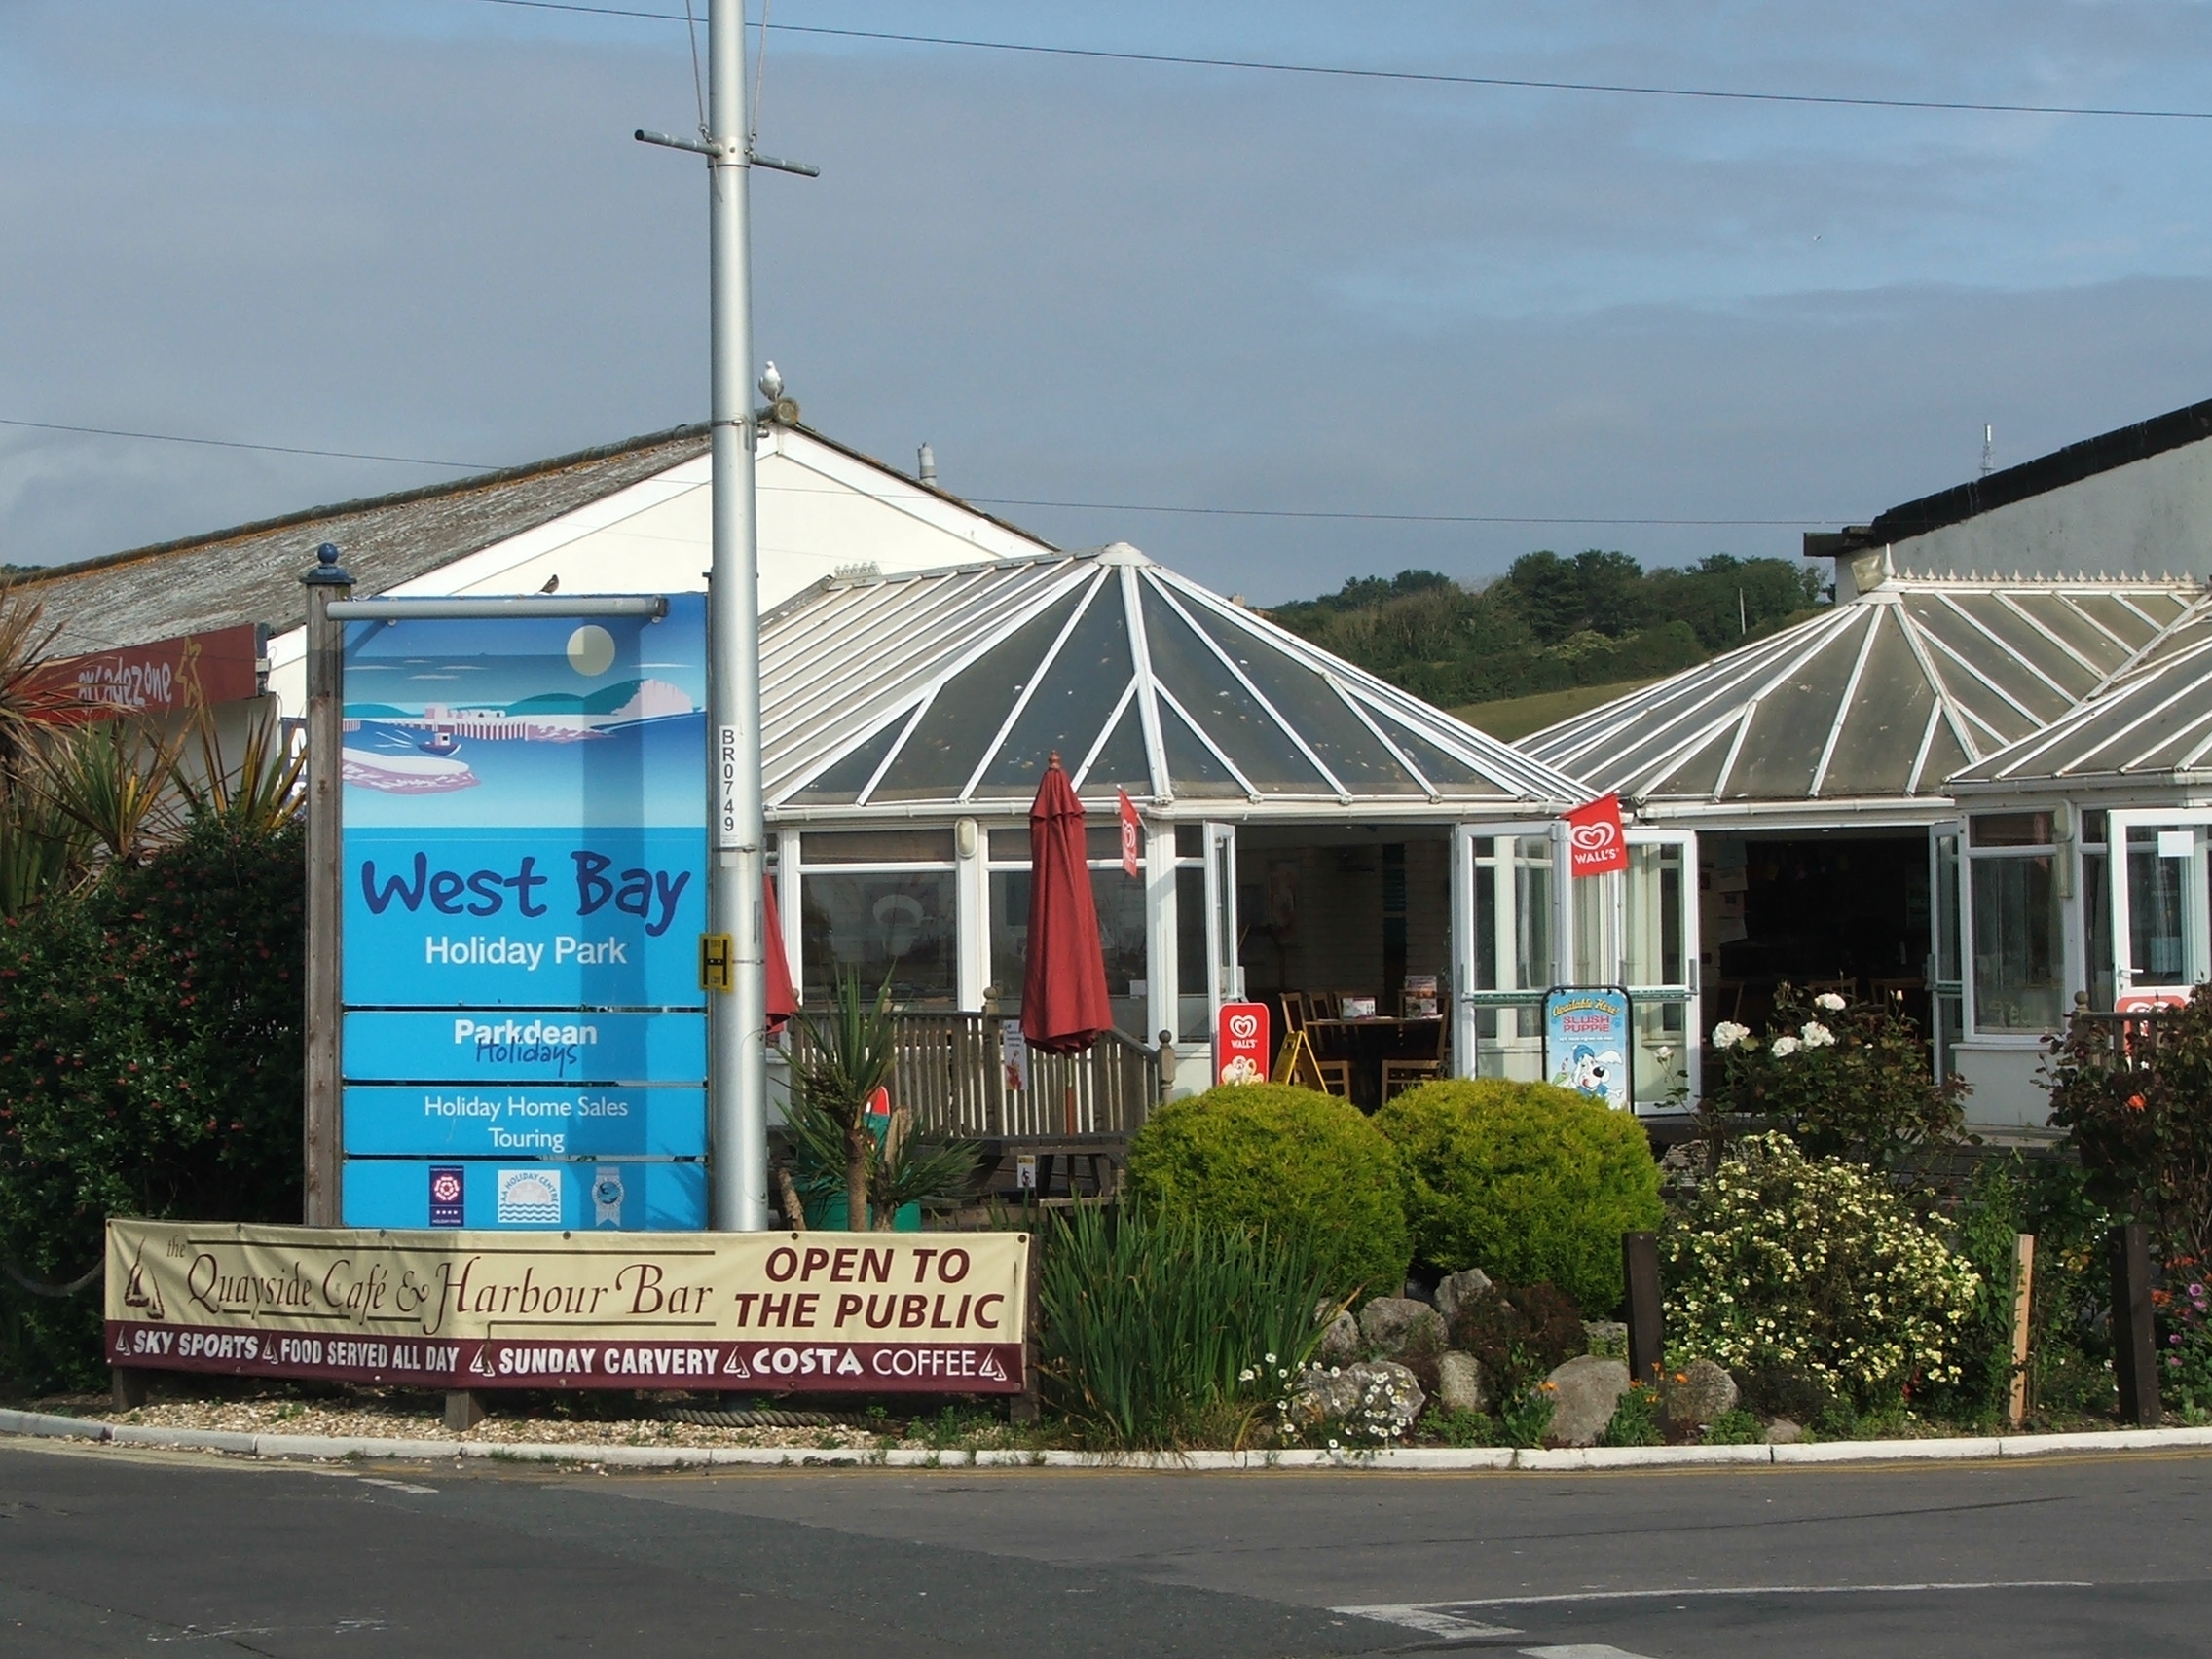 West Bay Holiday Park to benefit from cash injection from Parkdean - Bridport and Lyme Regis News